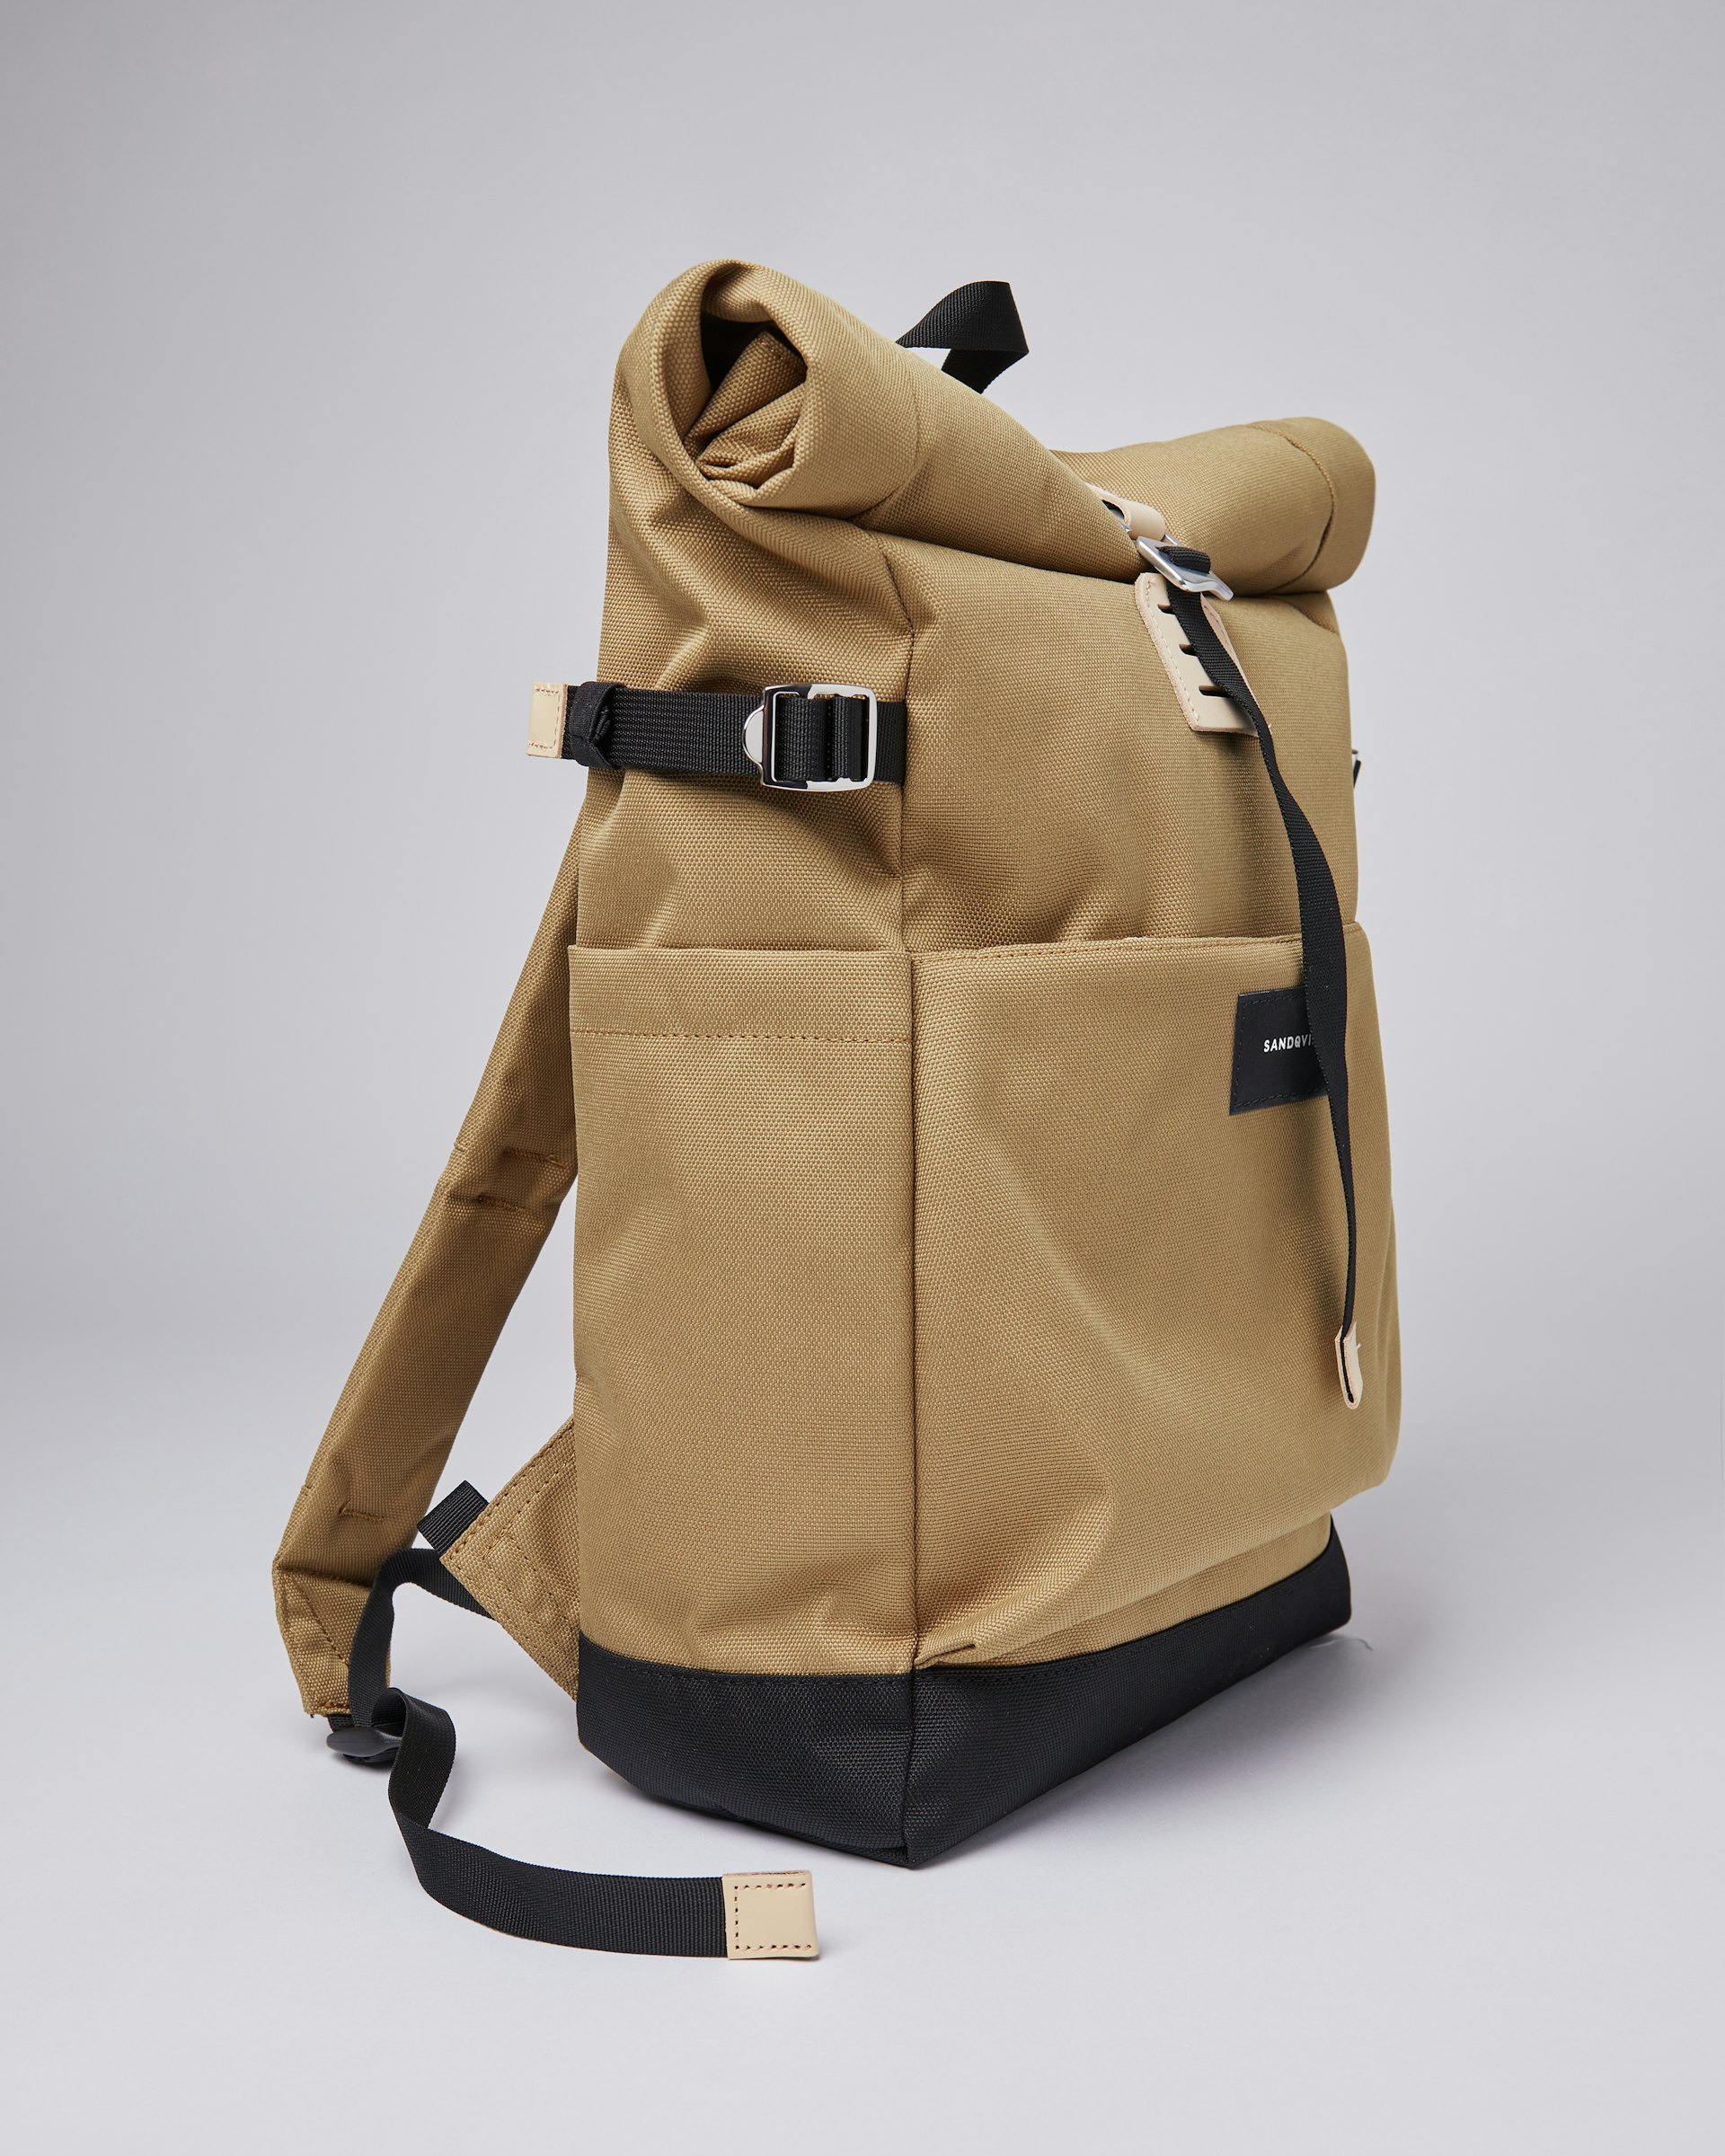 Ilon belongs to the category Backpacks and is in color black & bronze (4 of 7)